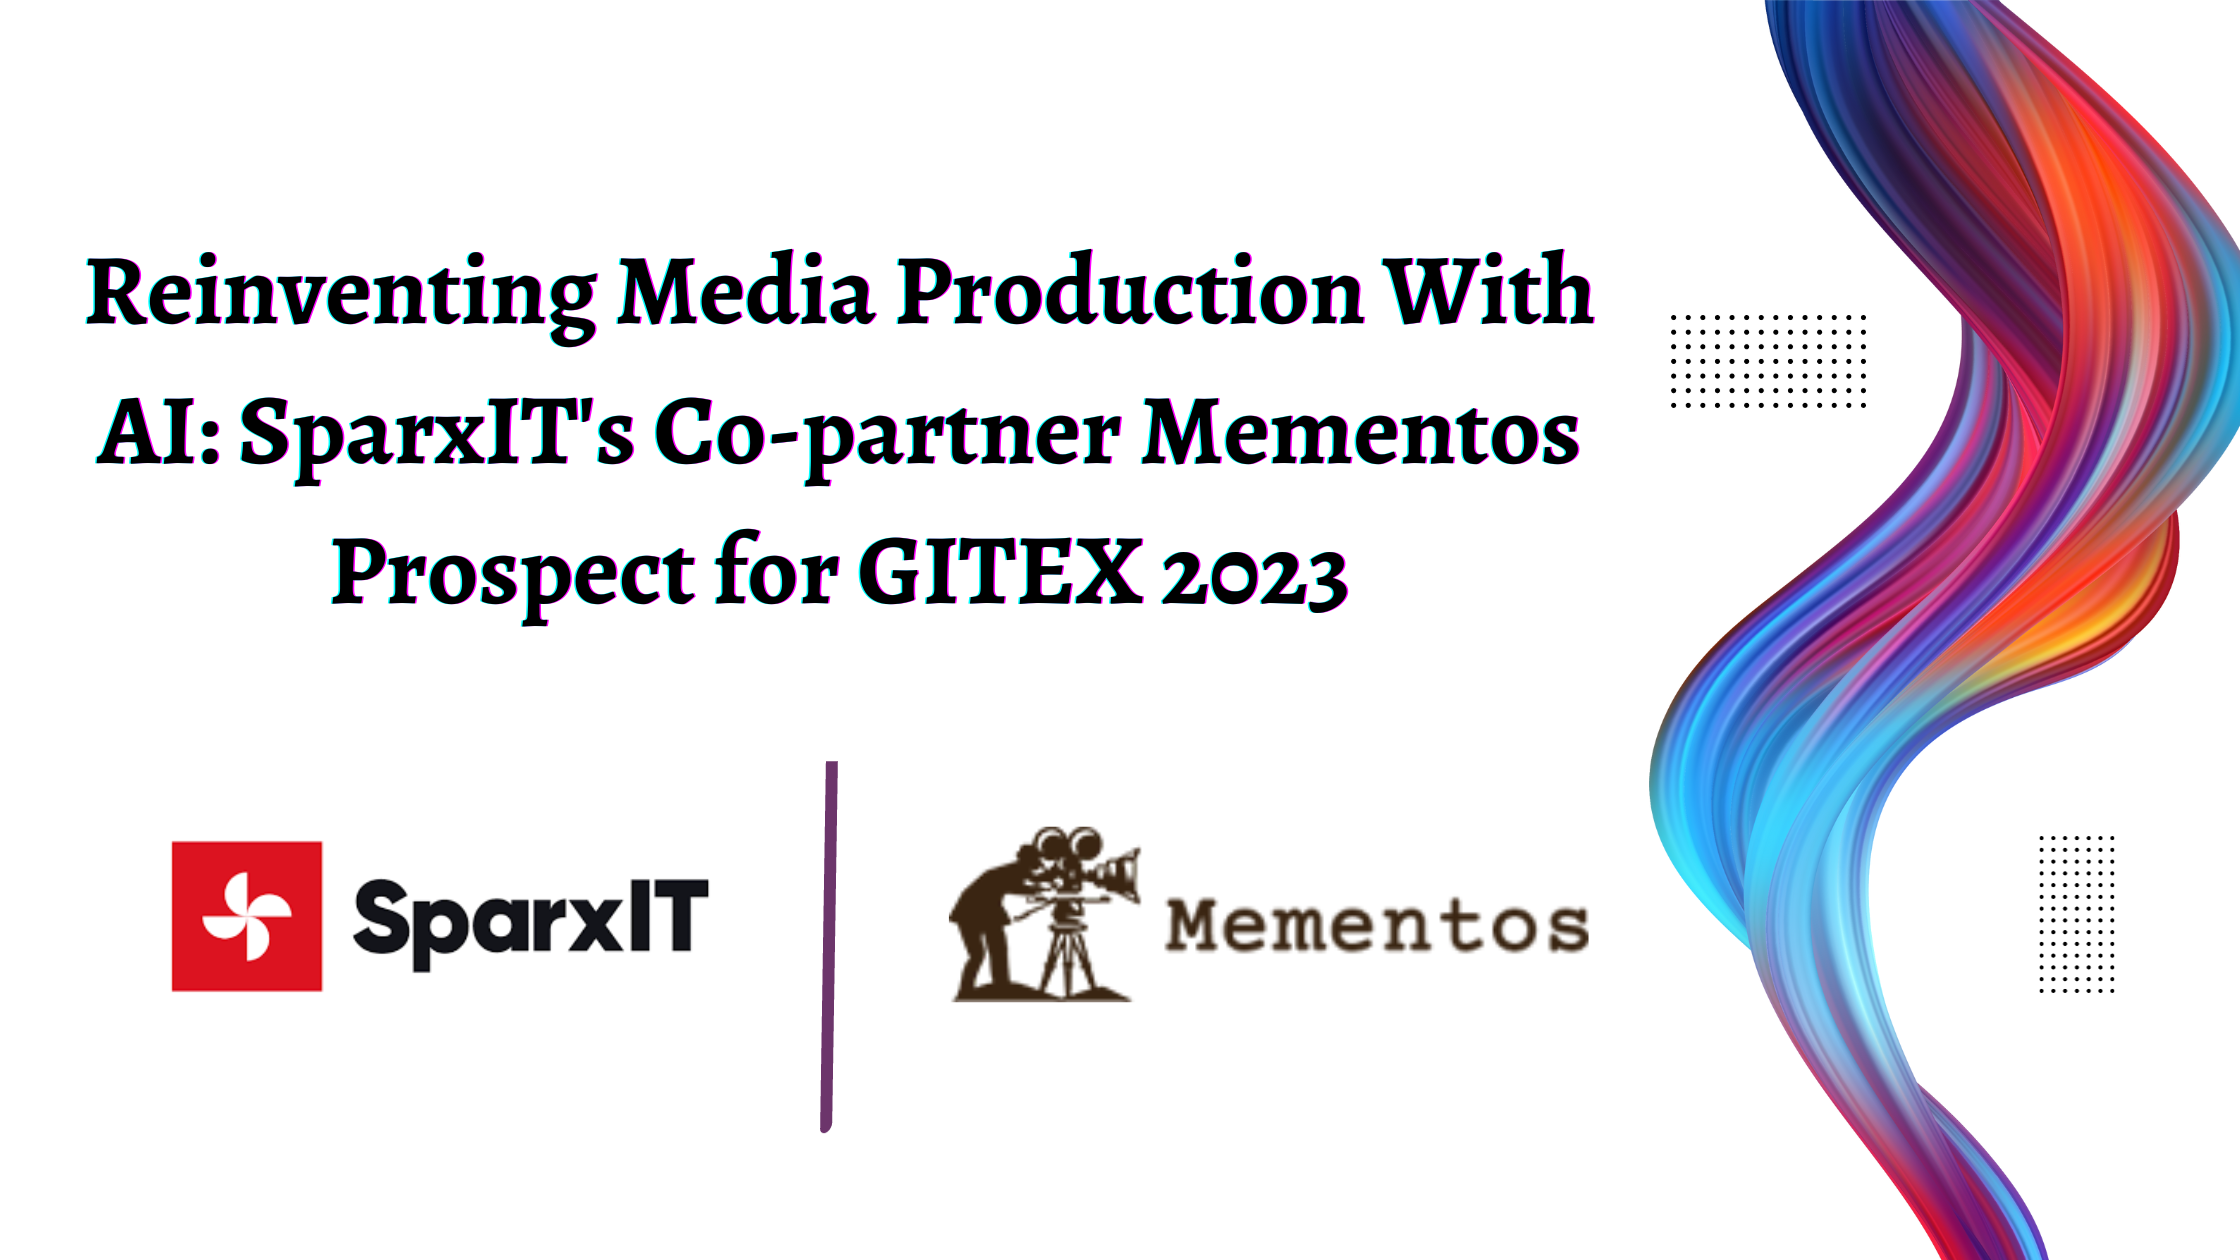 Reinventing Media Production With AI: SparxIT’s Co-partner Mementos Prospect for GITEX 2023